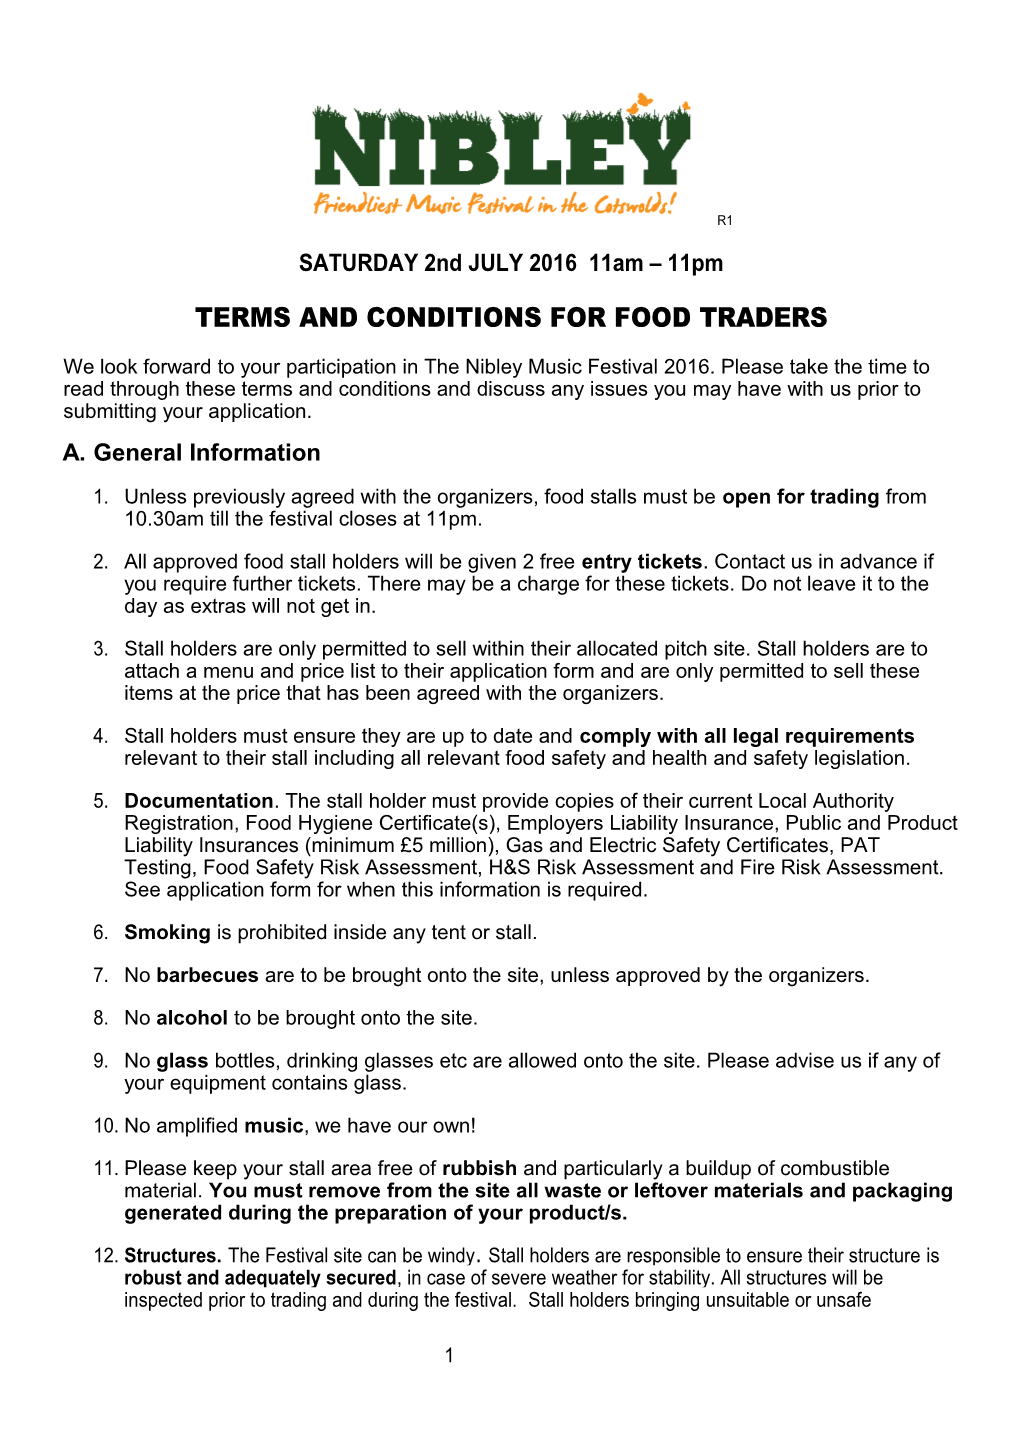 Terms and Conditions for Food Traders